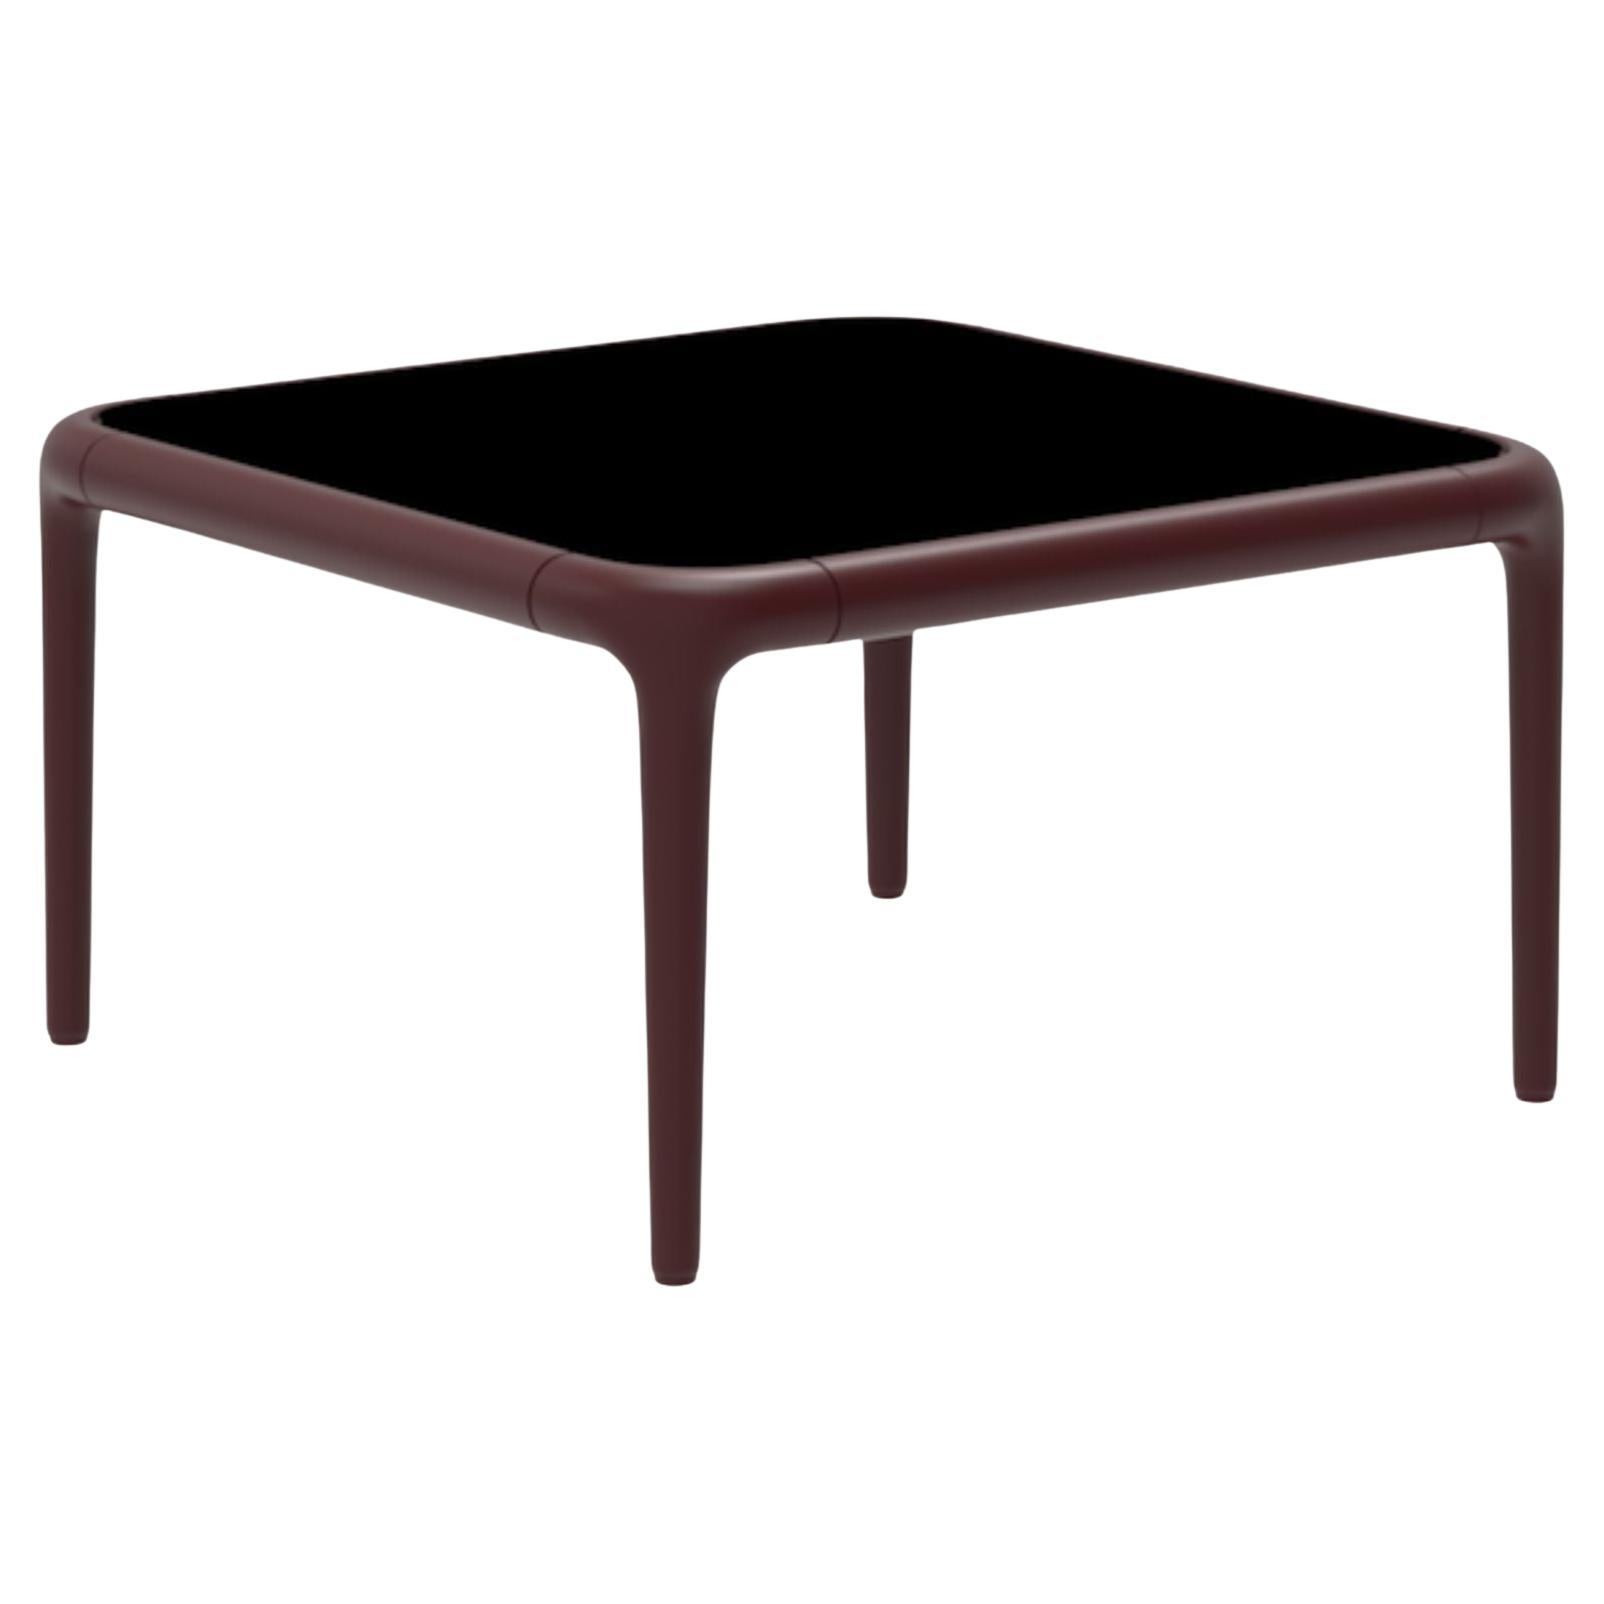 Xaloc Burgundy Coffee Table 50 with Glass Top by Mowee For Sale